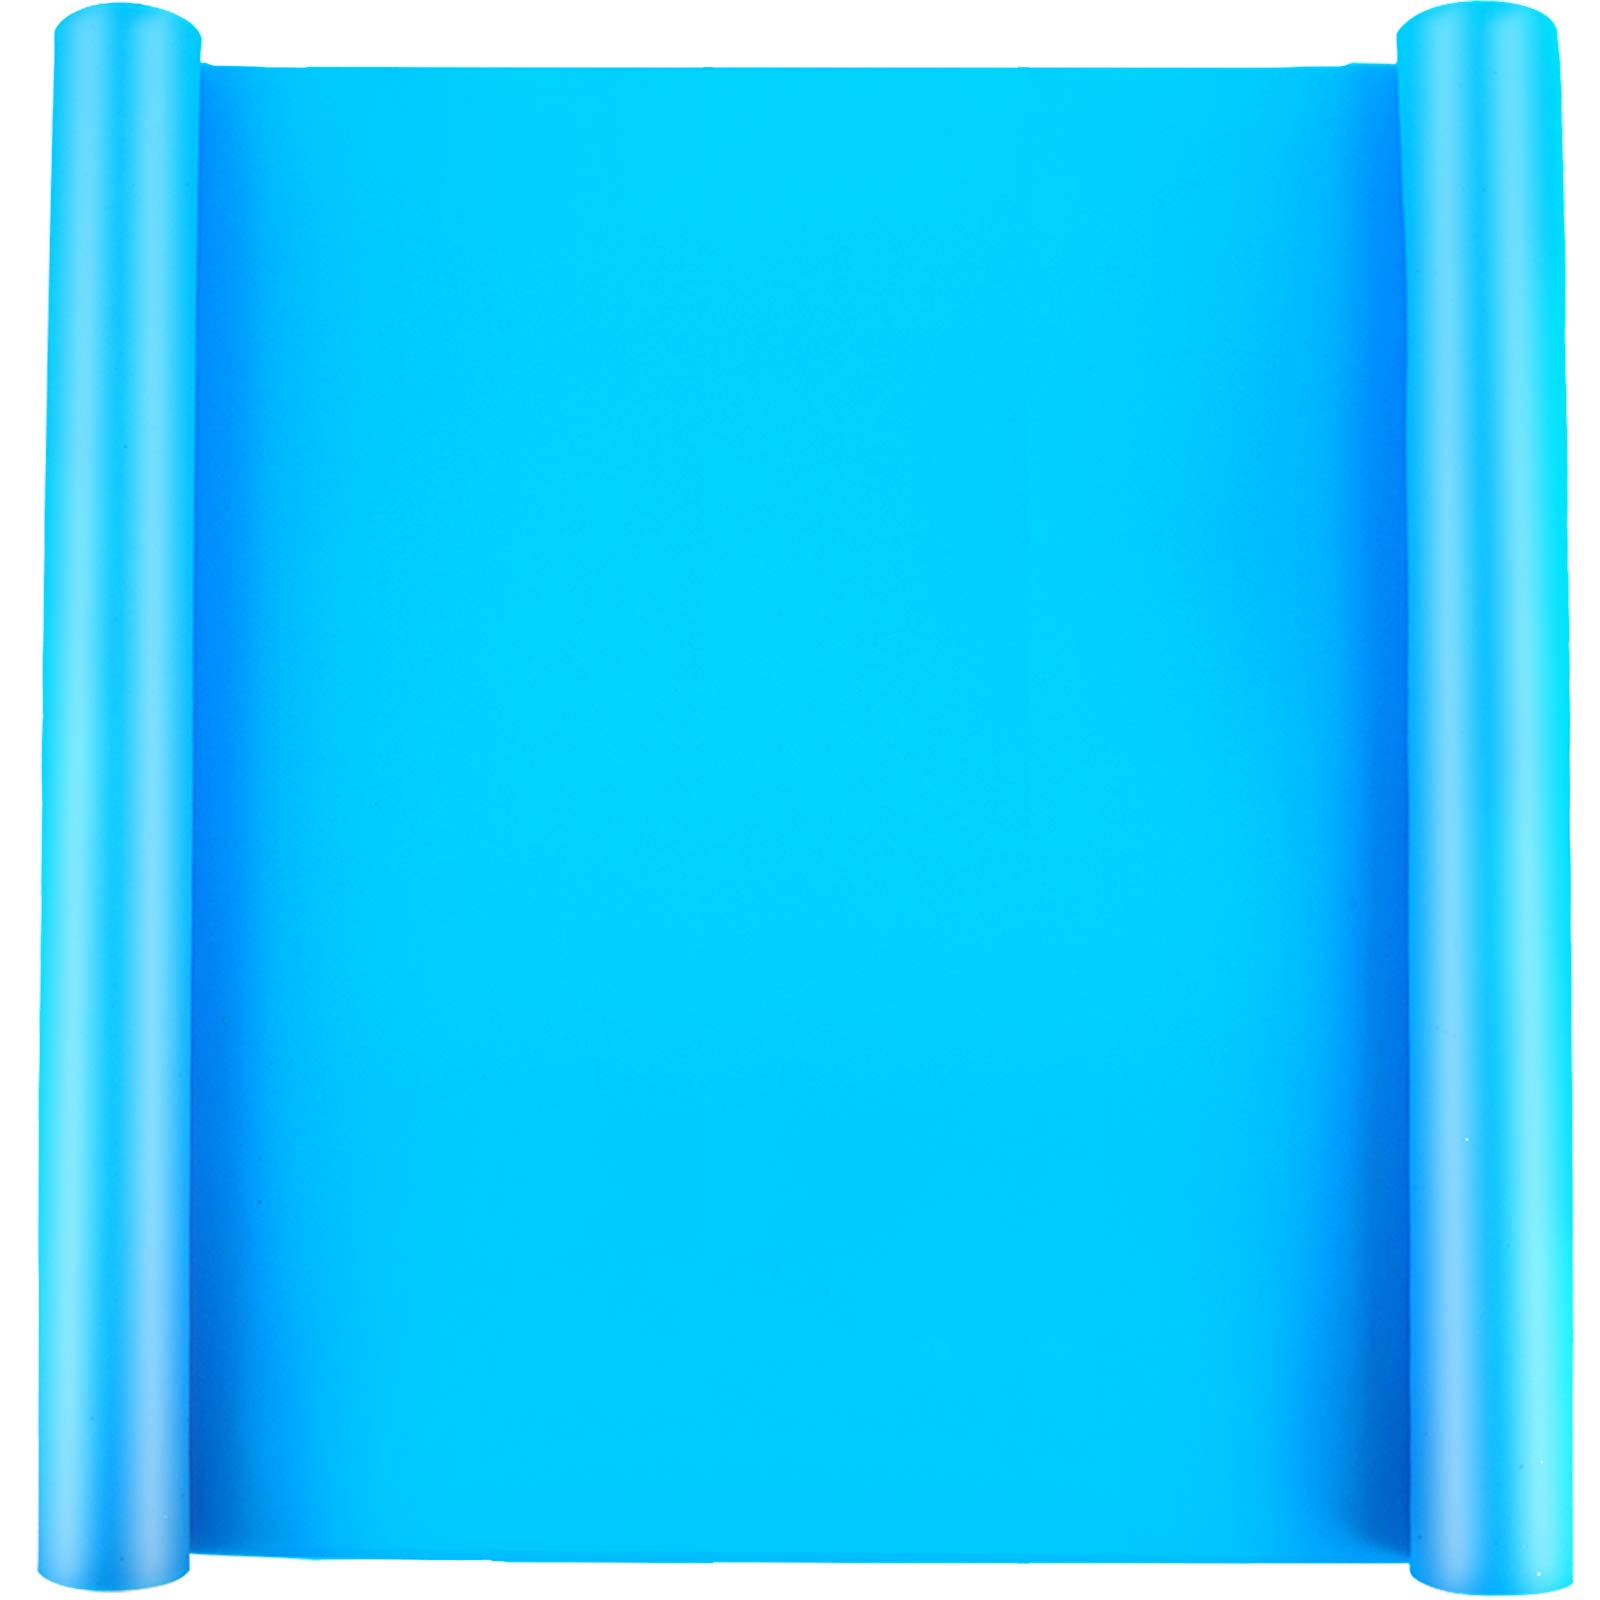 Silicone Mat Counter Protector / Silicone Sheets for Crafts / Heat Resistant / 40x30 CM